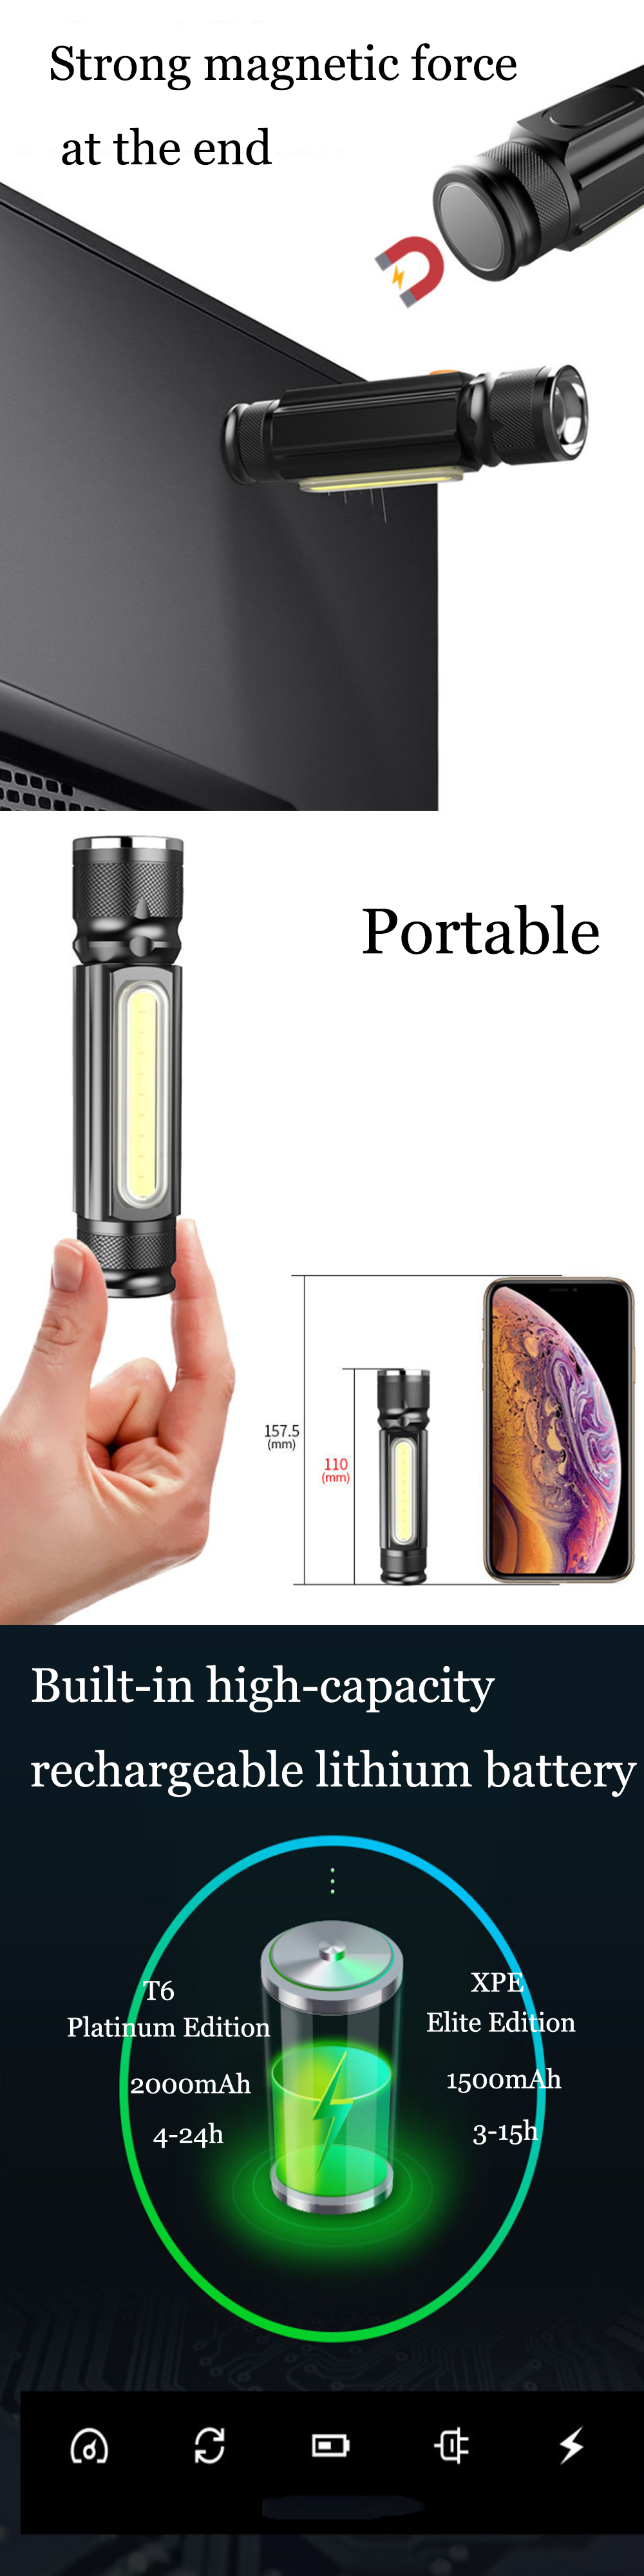 800LM-T6COB-Zoomable-Multifunction-LED-Flashlight-with-Magnet-Handy18650-Li-Battery-USB-Rechargeable-1830912-3